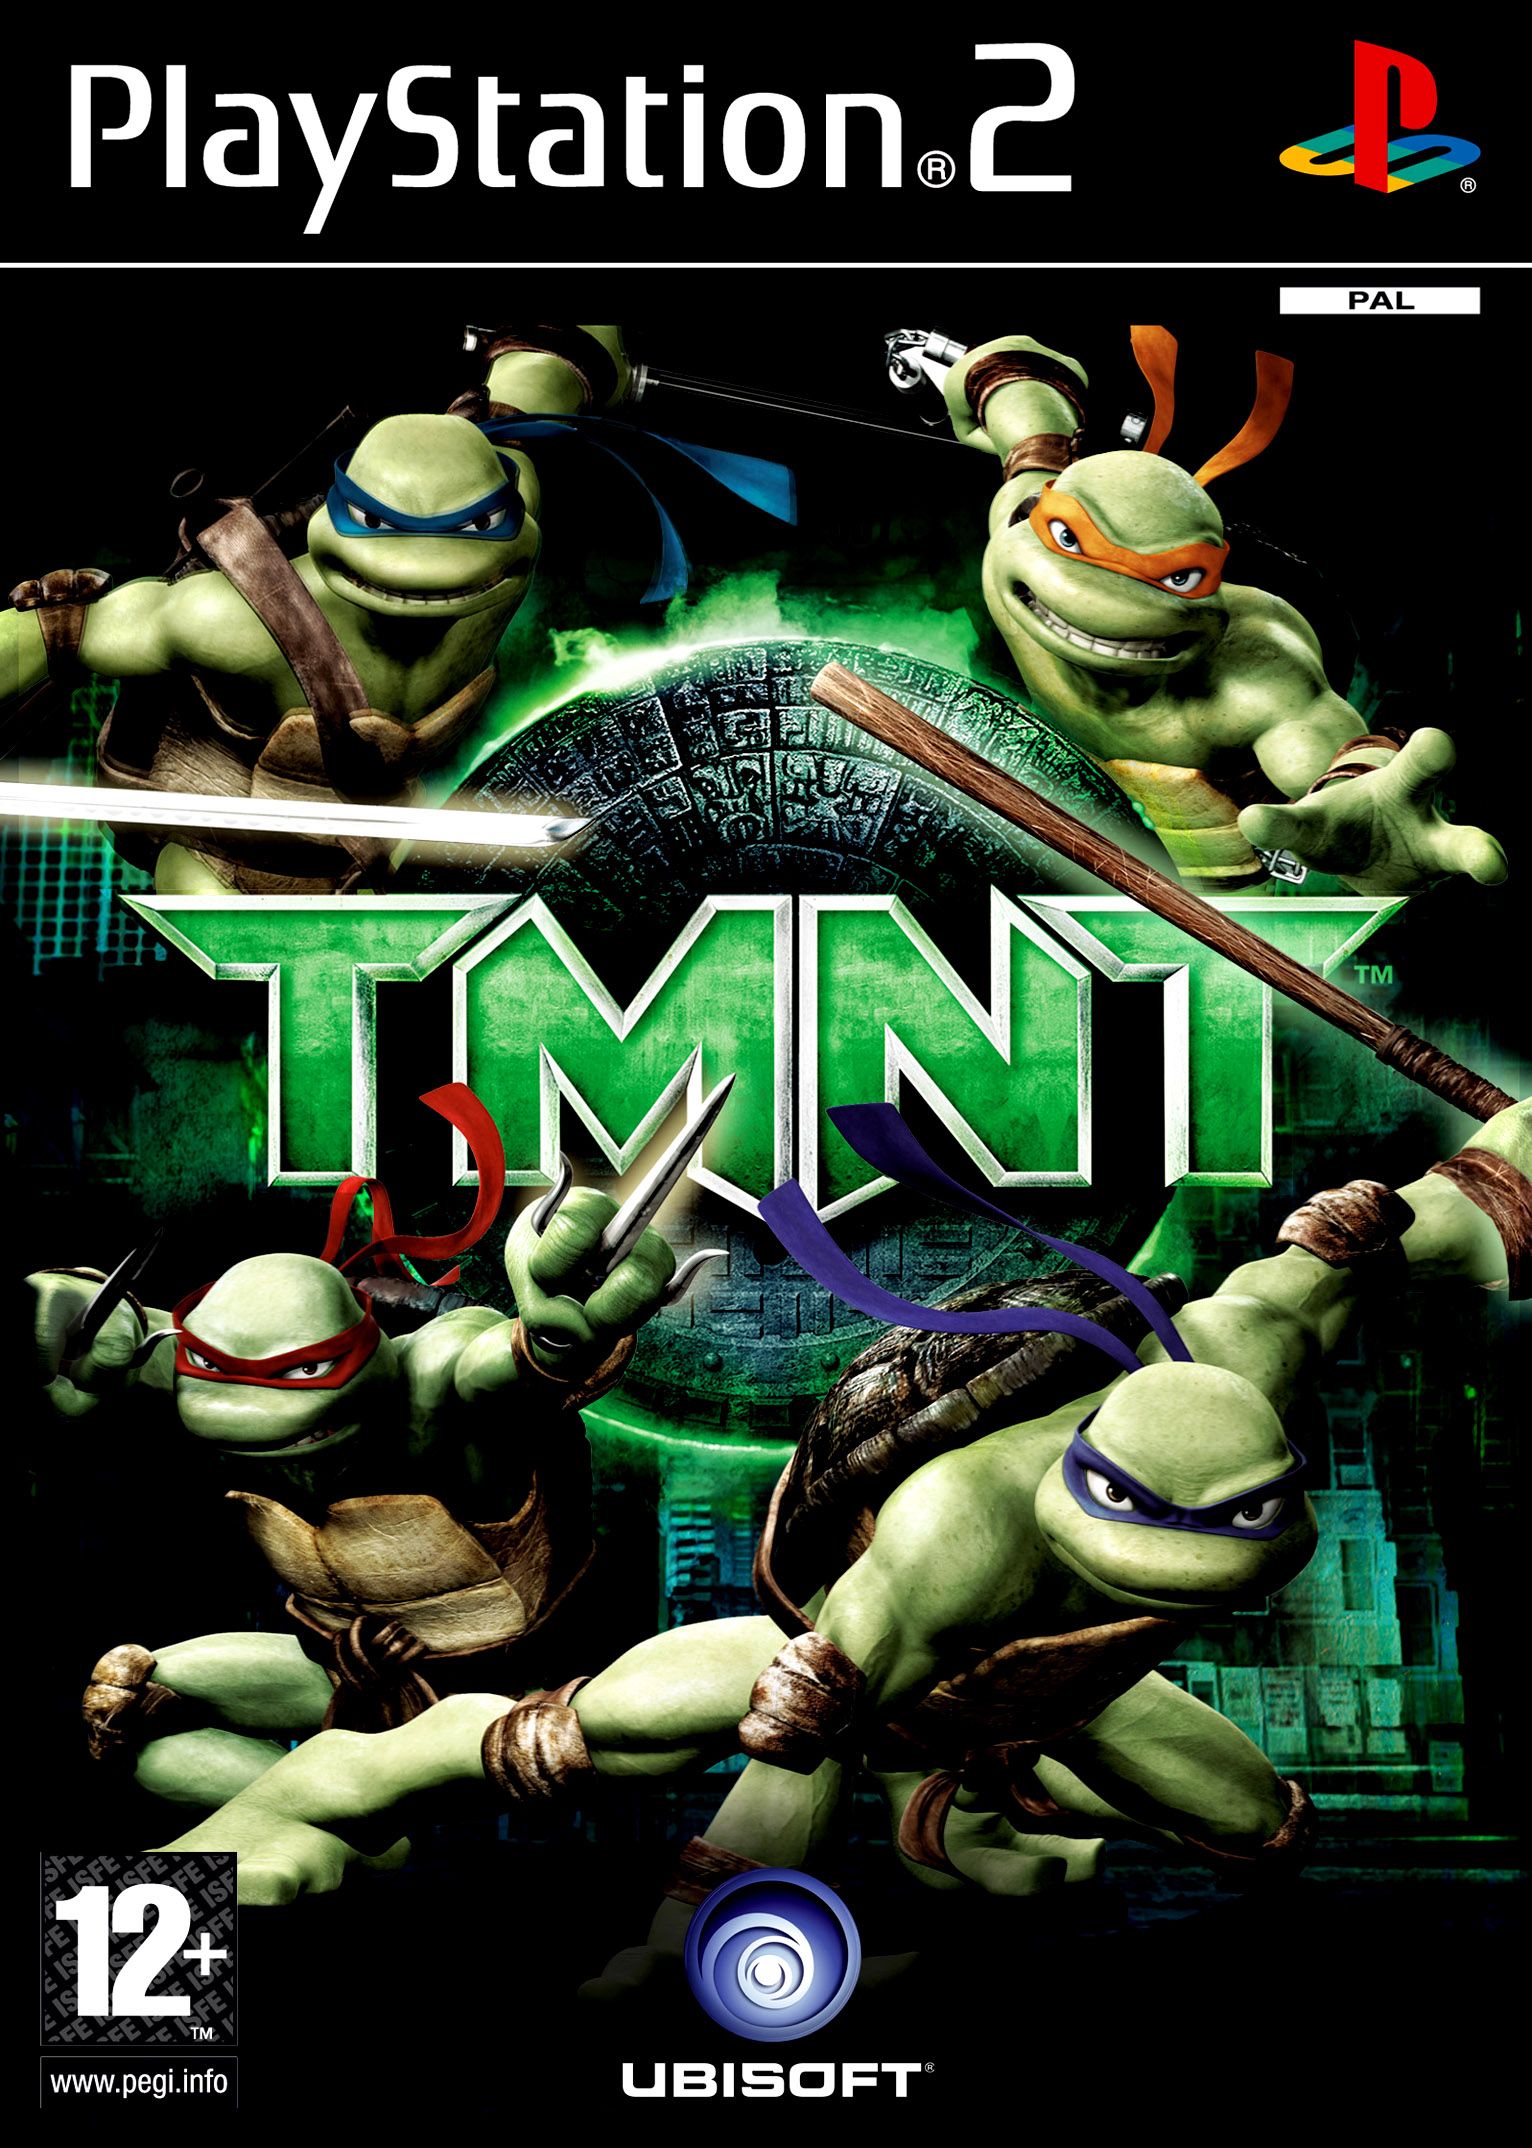 Download tmnt 2007 pc game highly compressed